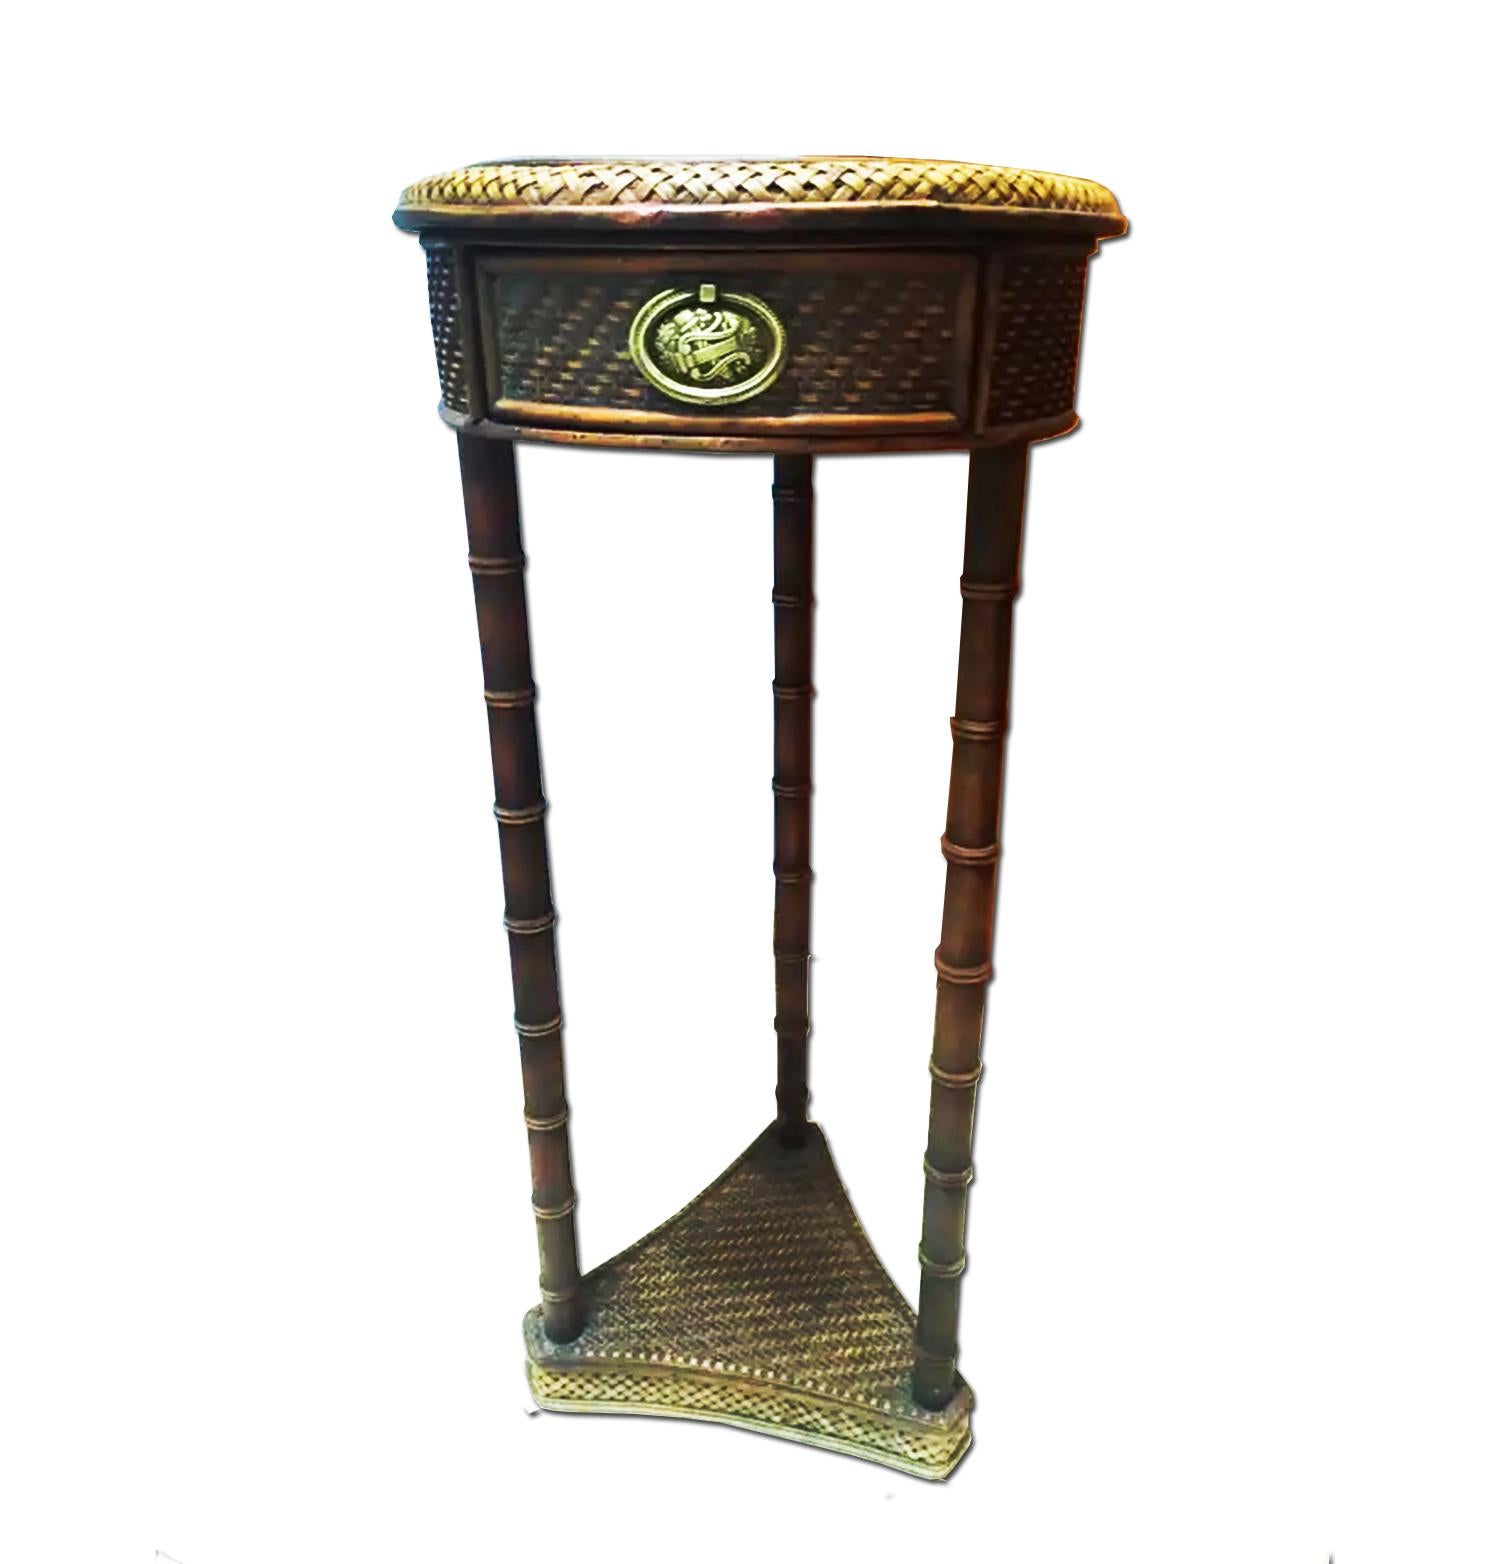 Round table in rattan and fake bamboo wood with drawer

prices table with 3 legs in fake babu and in dyed rattan and central drawer with brass handle

Table with oriental reminiscences, very unusual and elegant.


